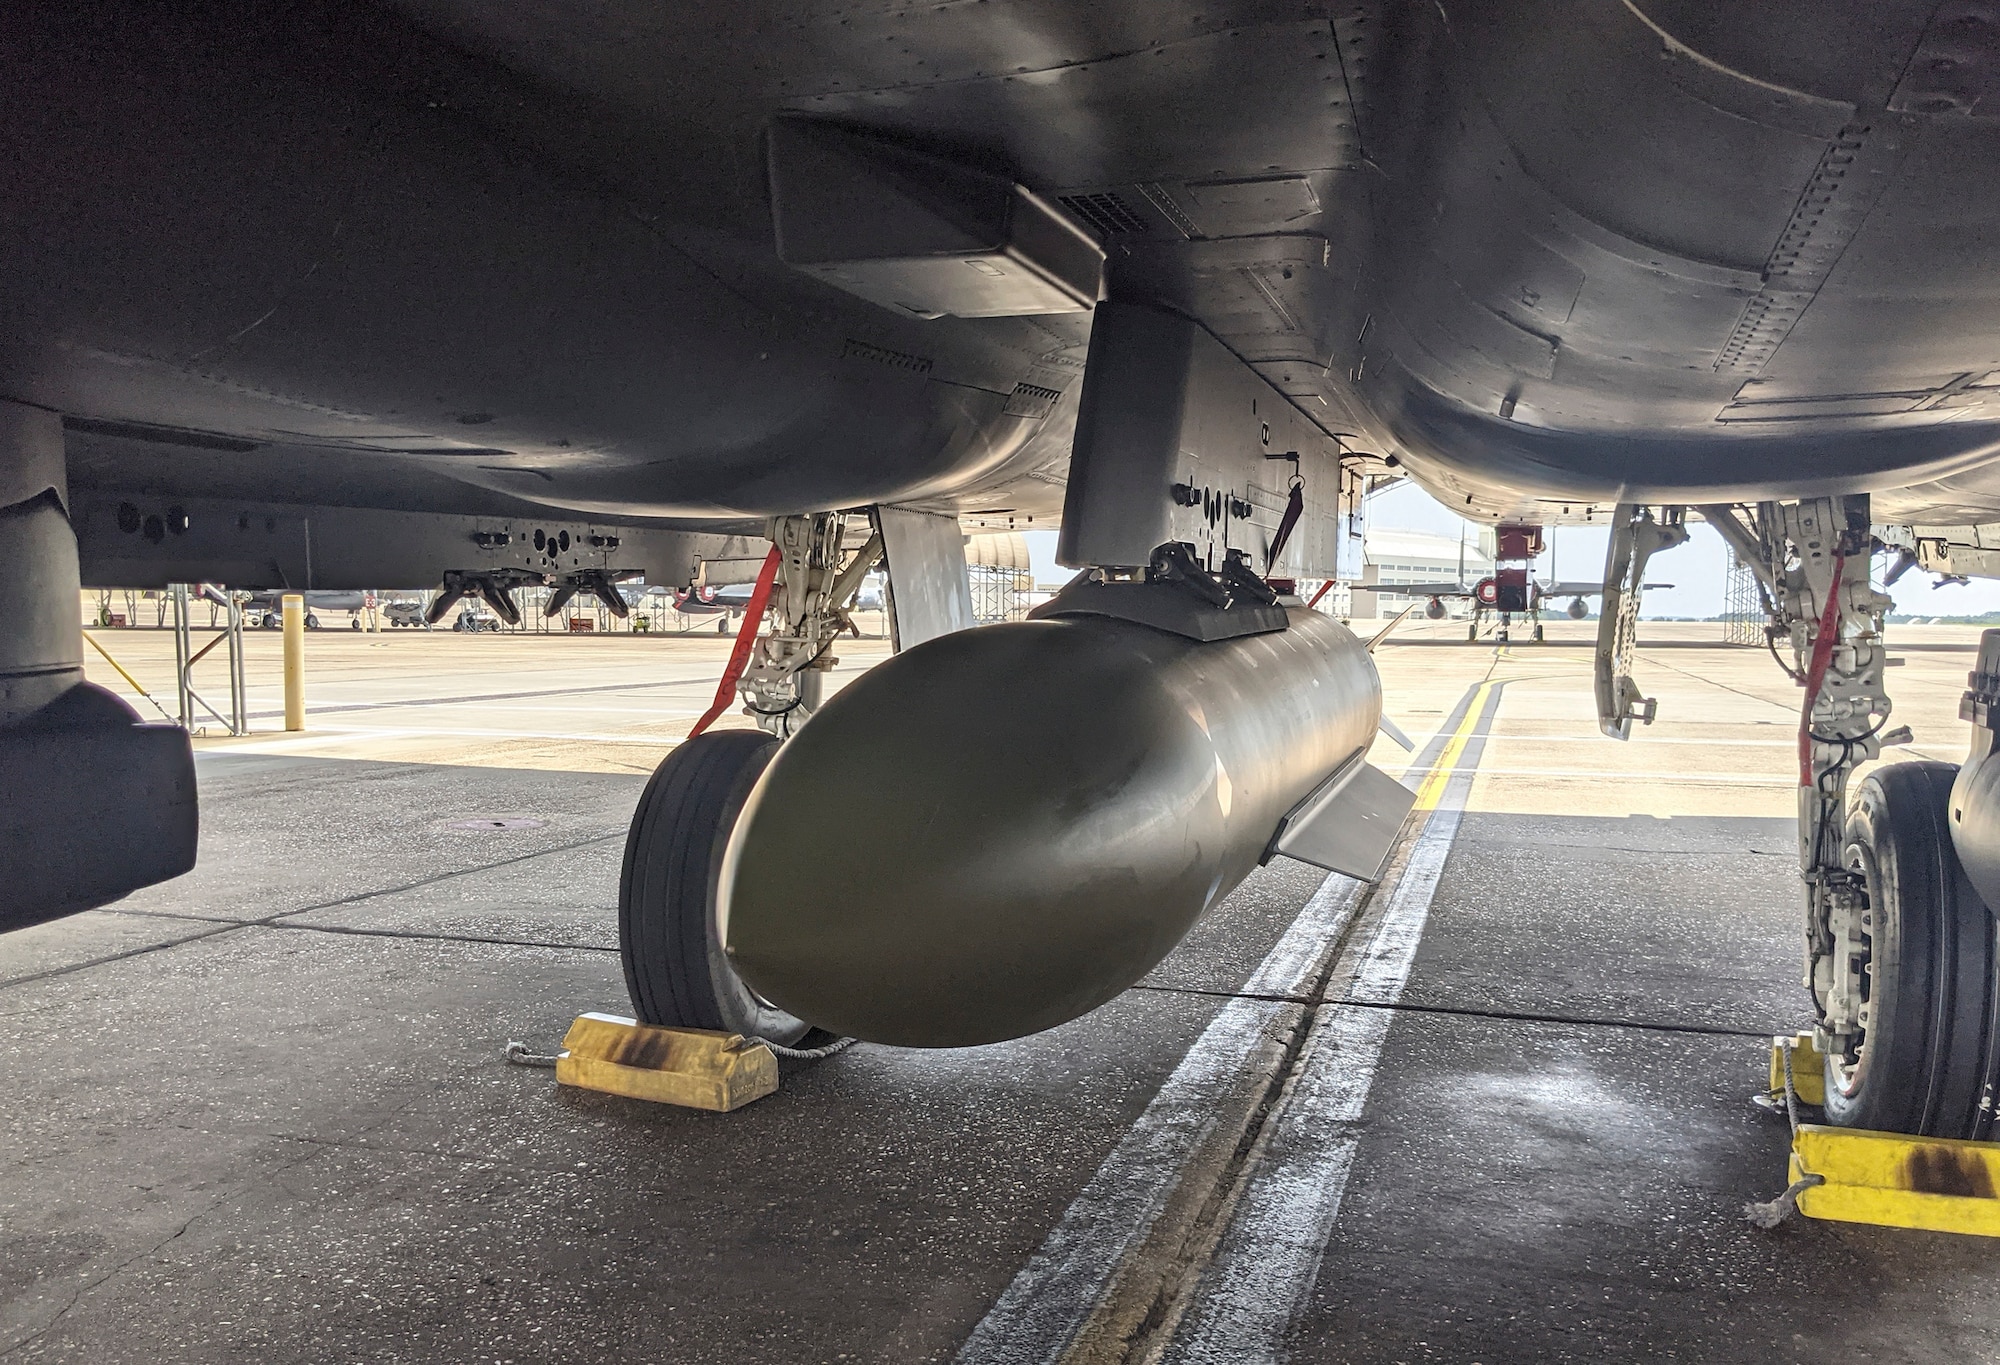 The 96th Test Wing recently concluded a GBU-72 test series which featured the first ever load, flight and release of the 5,000-pound weapon at Eglin Air Force Base, Fla.